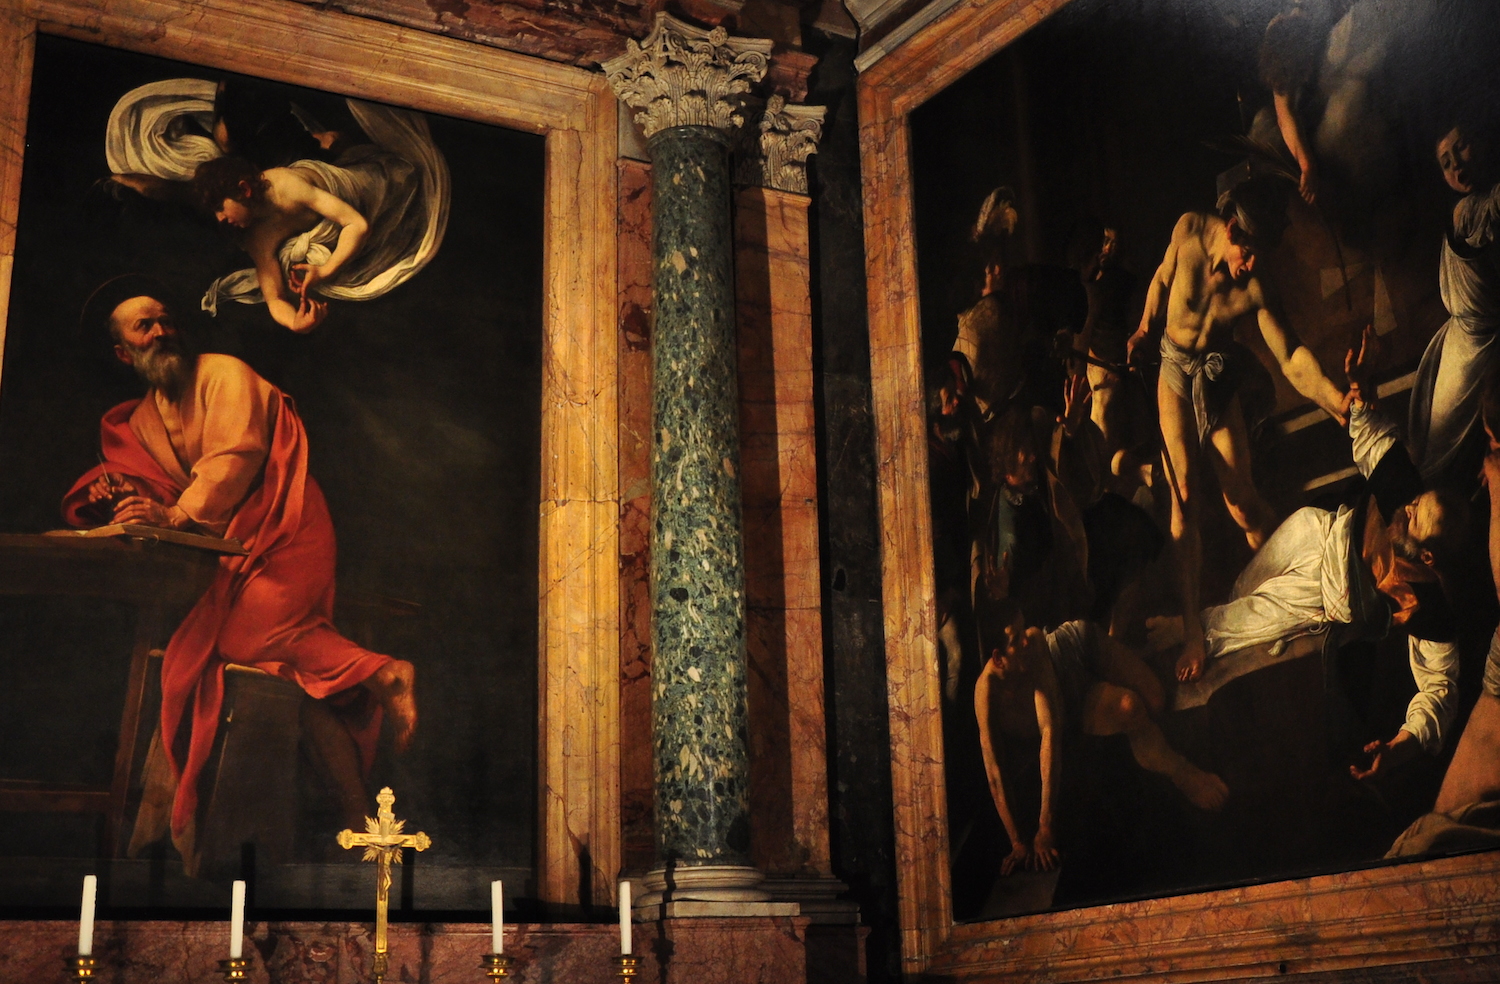 Caravaggio paintings at Chiesa di San Pietro in Vincoli. Image by Francisco Antunes / CC BY 2.0